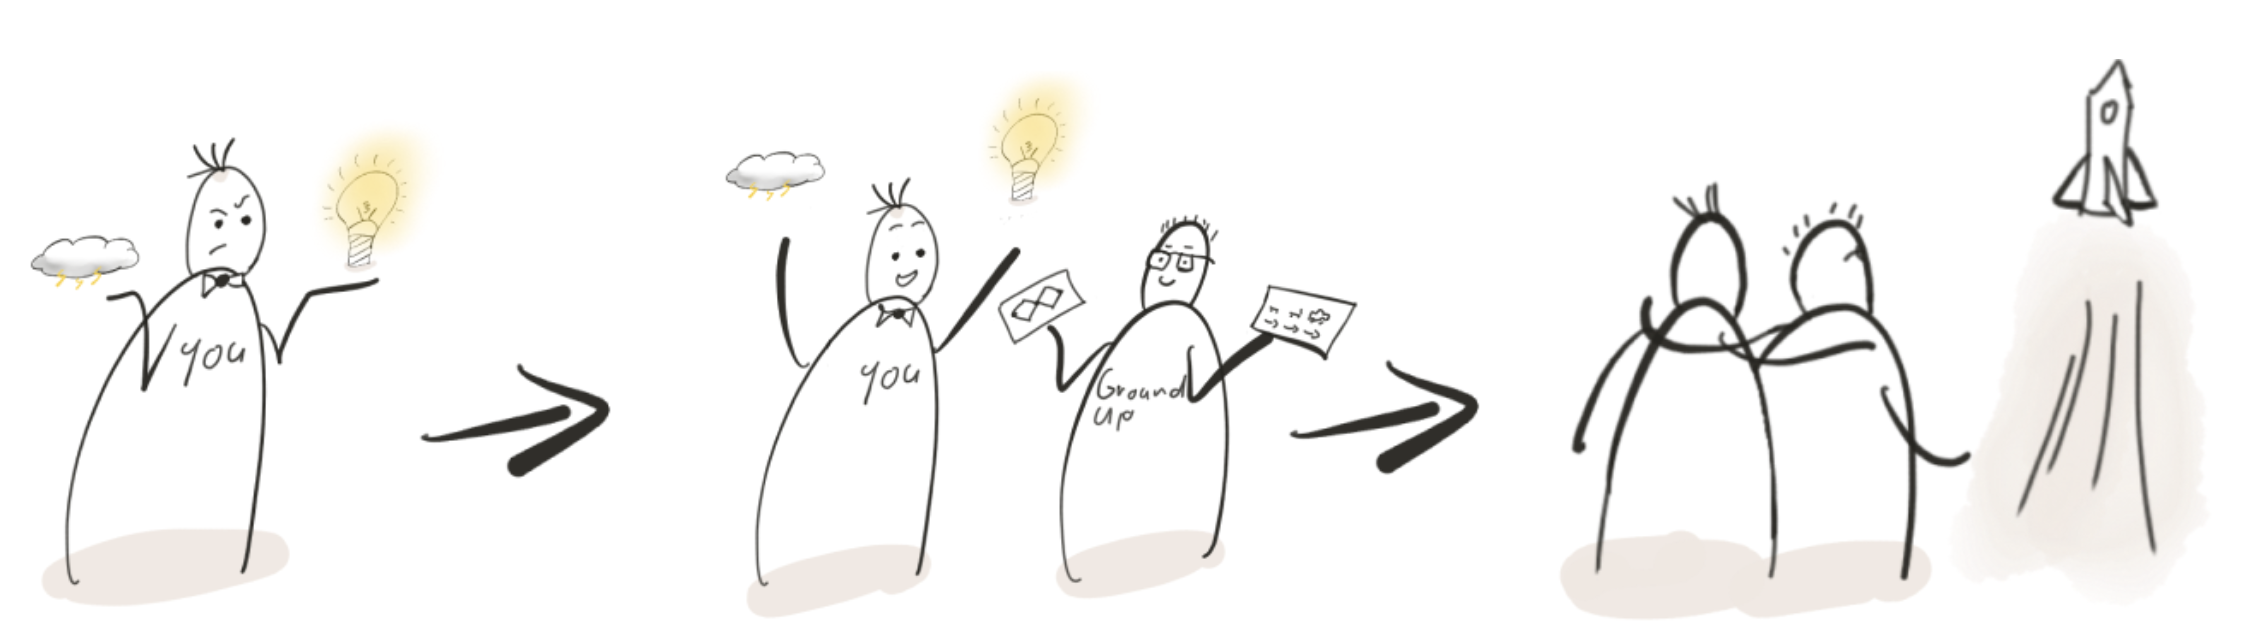 drawn characters taking problems and ideas through the stages of design thinking